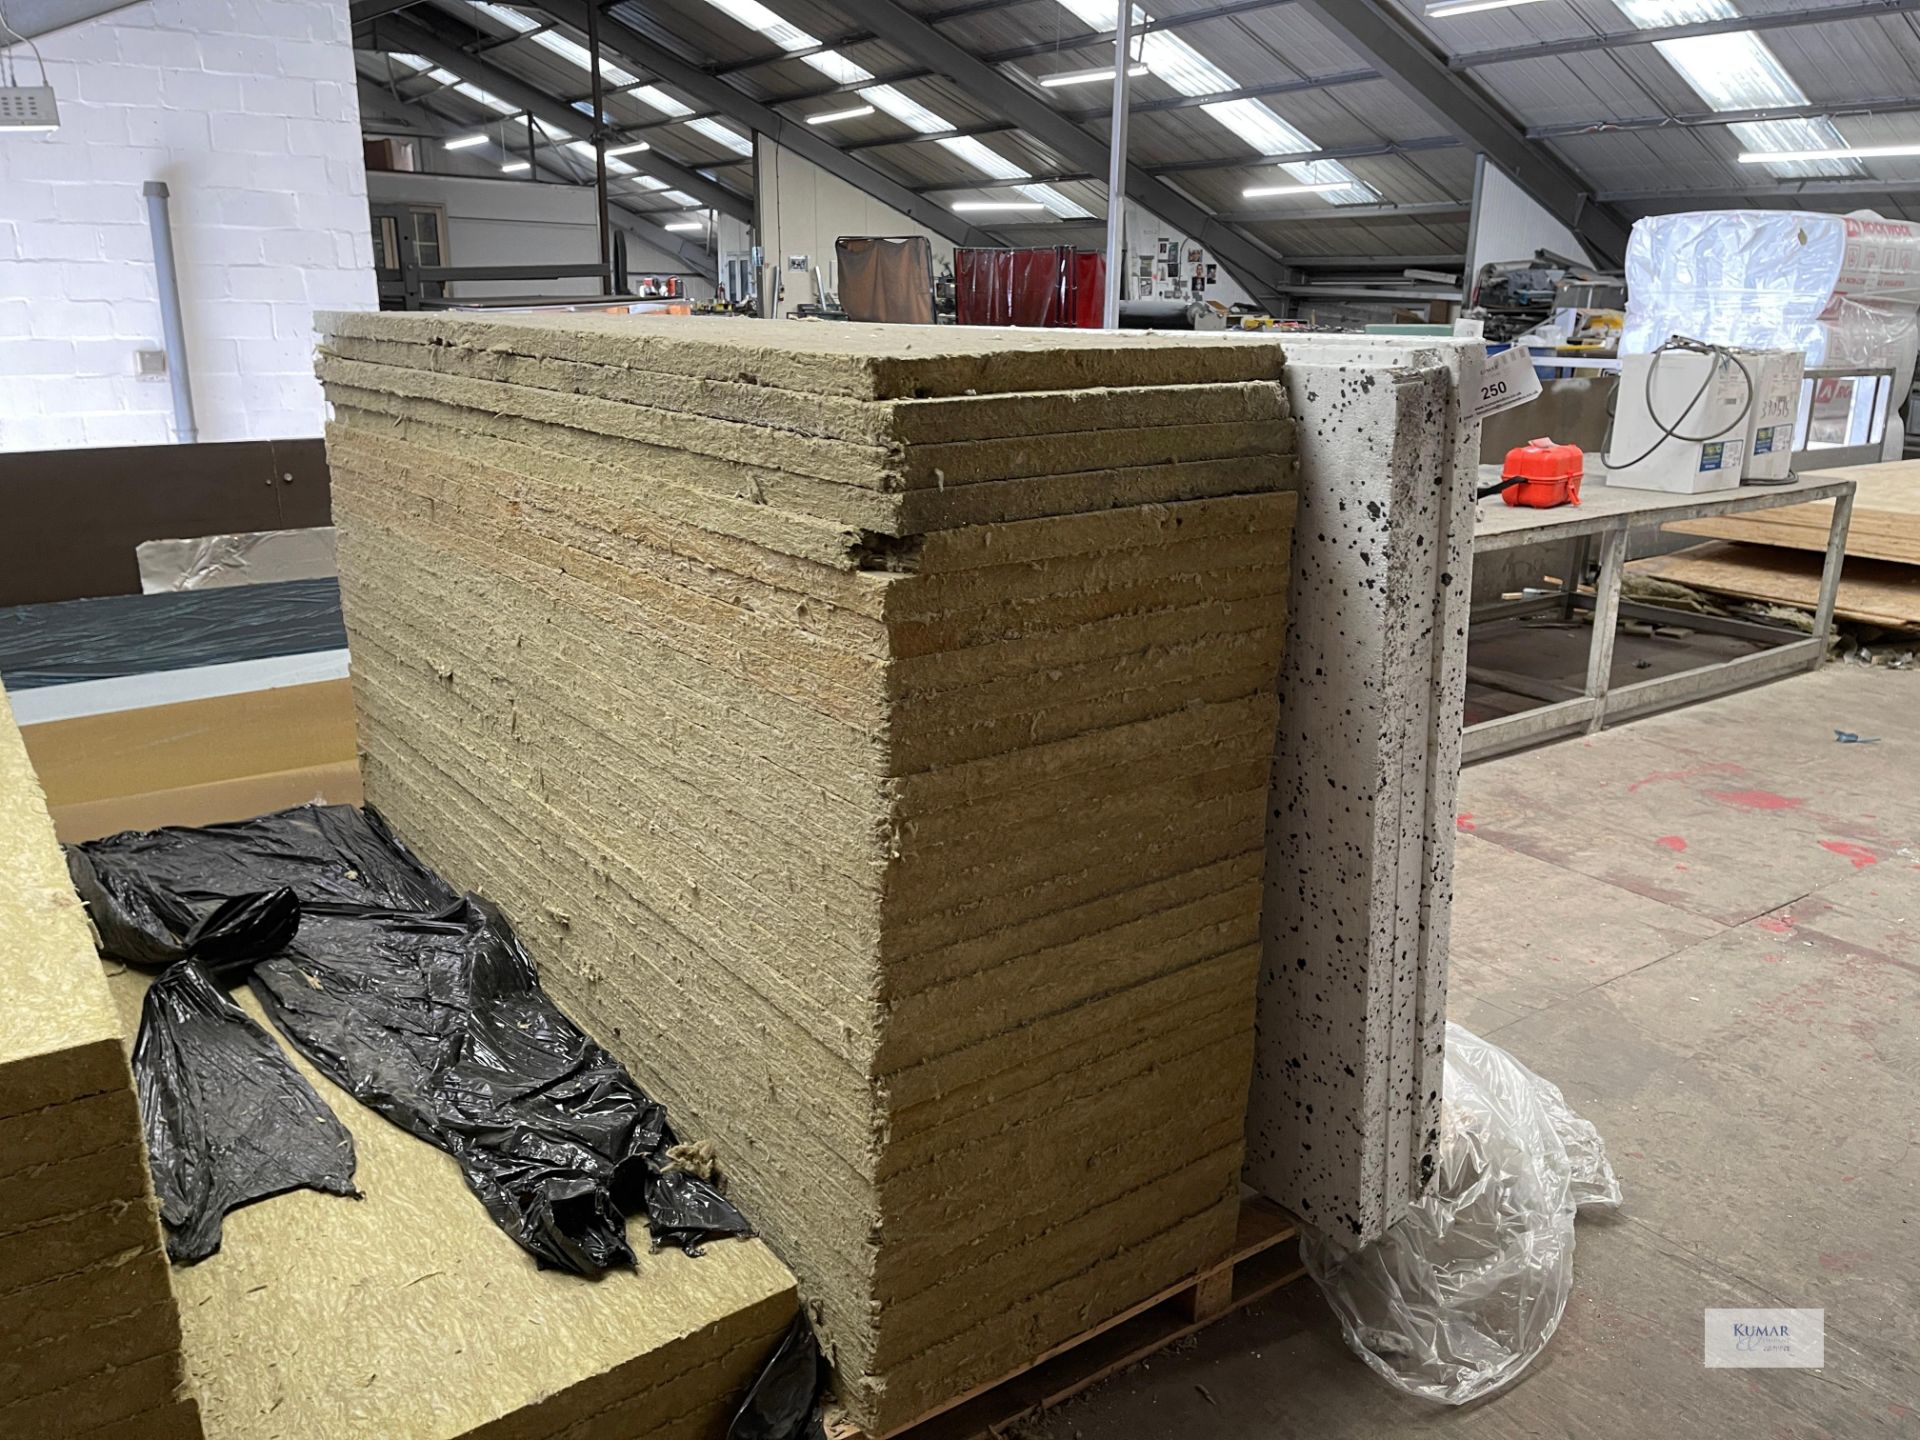 Quantity of RWA Rockwool A1 Non Combustible Insulation & 3: Sheets of Insulation Foam - Image 6 of 6